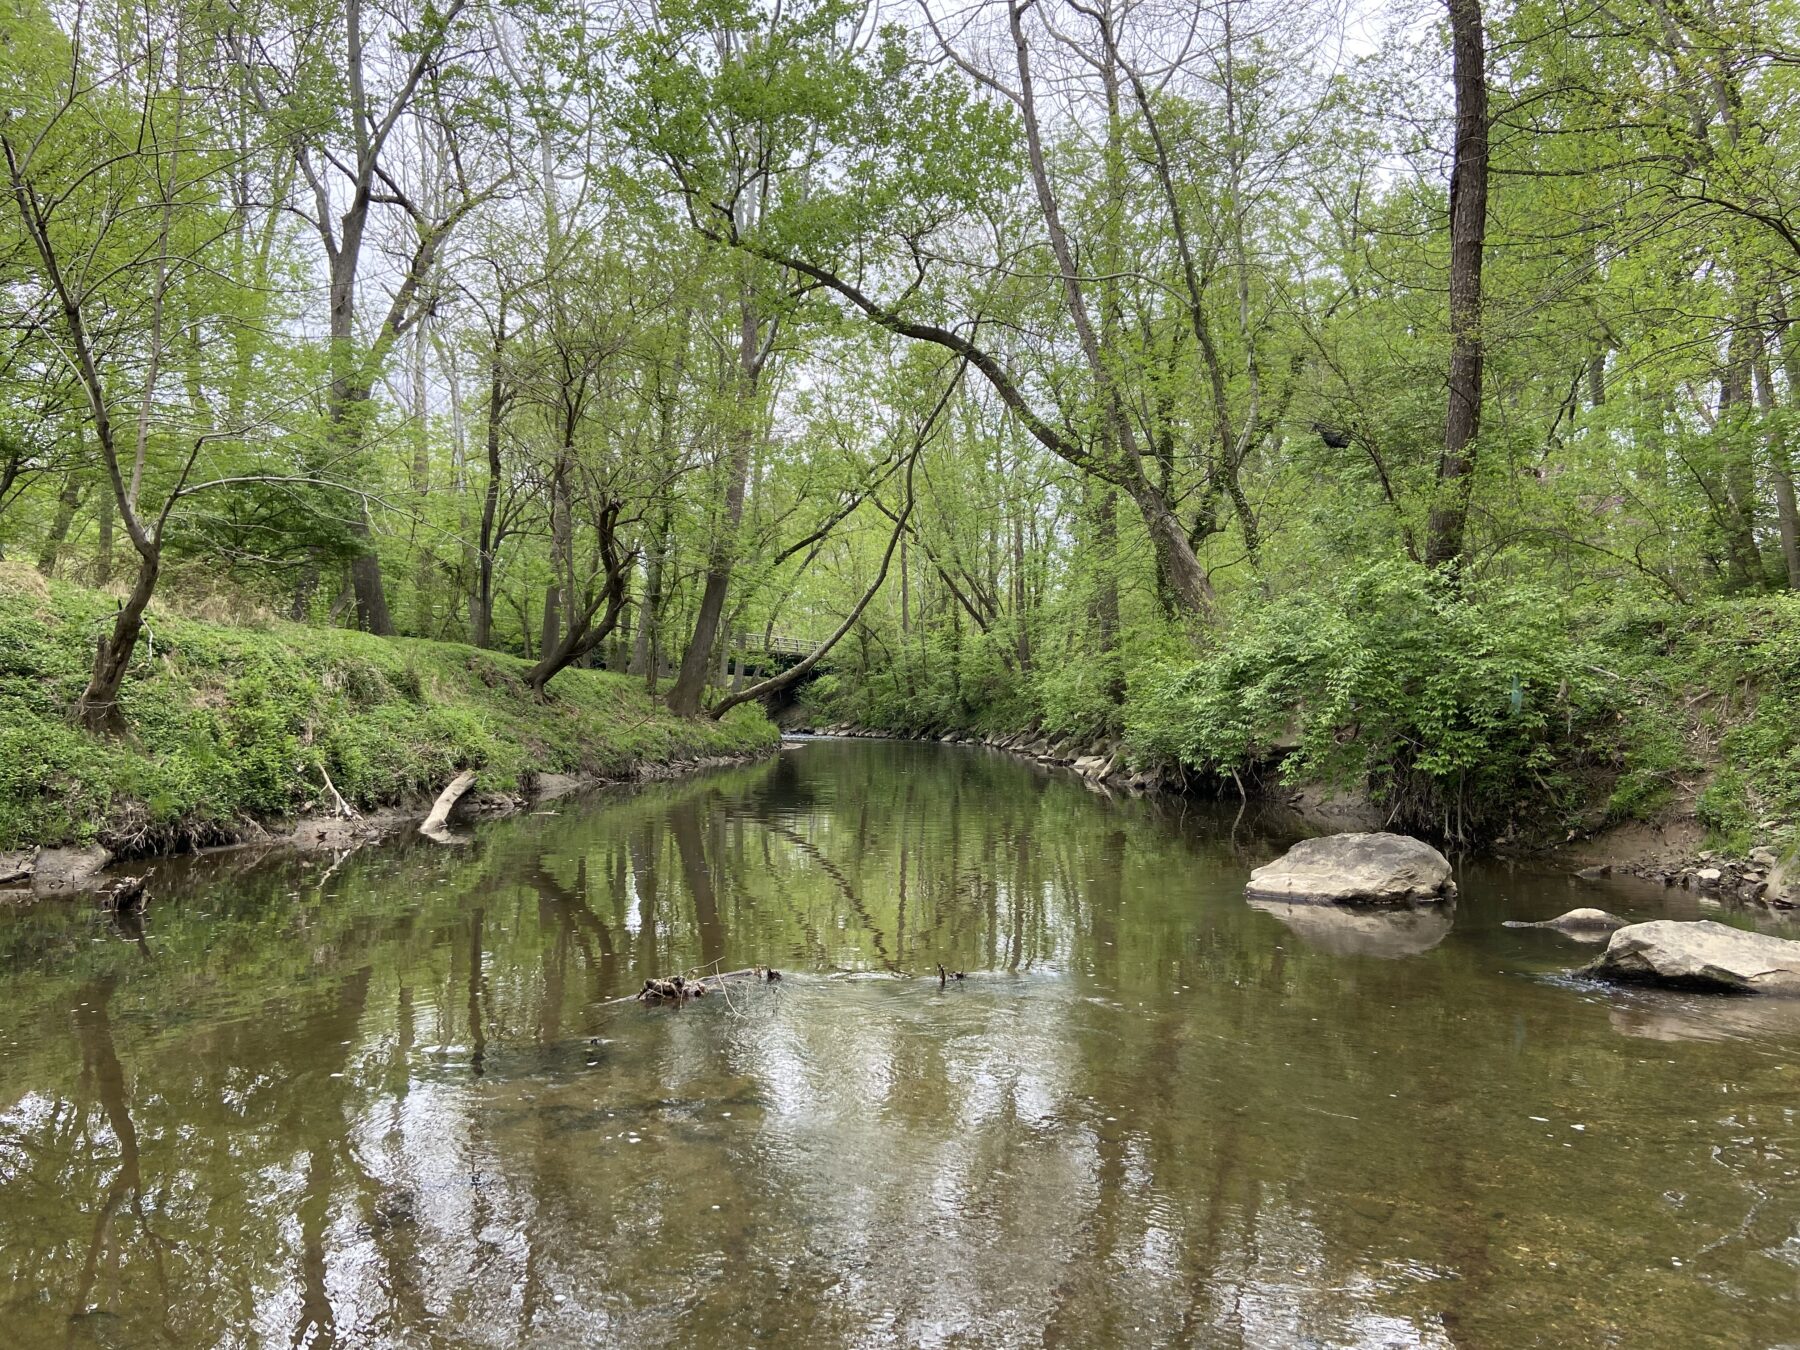 An image of a stream channel, with trees and other vegetation surrounding the waterbody on both sides.